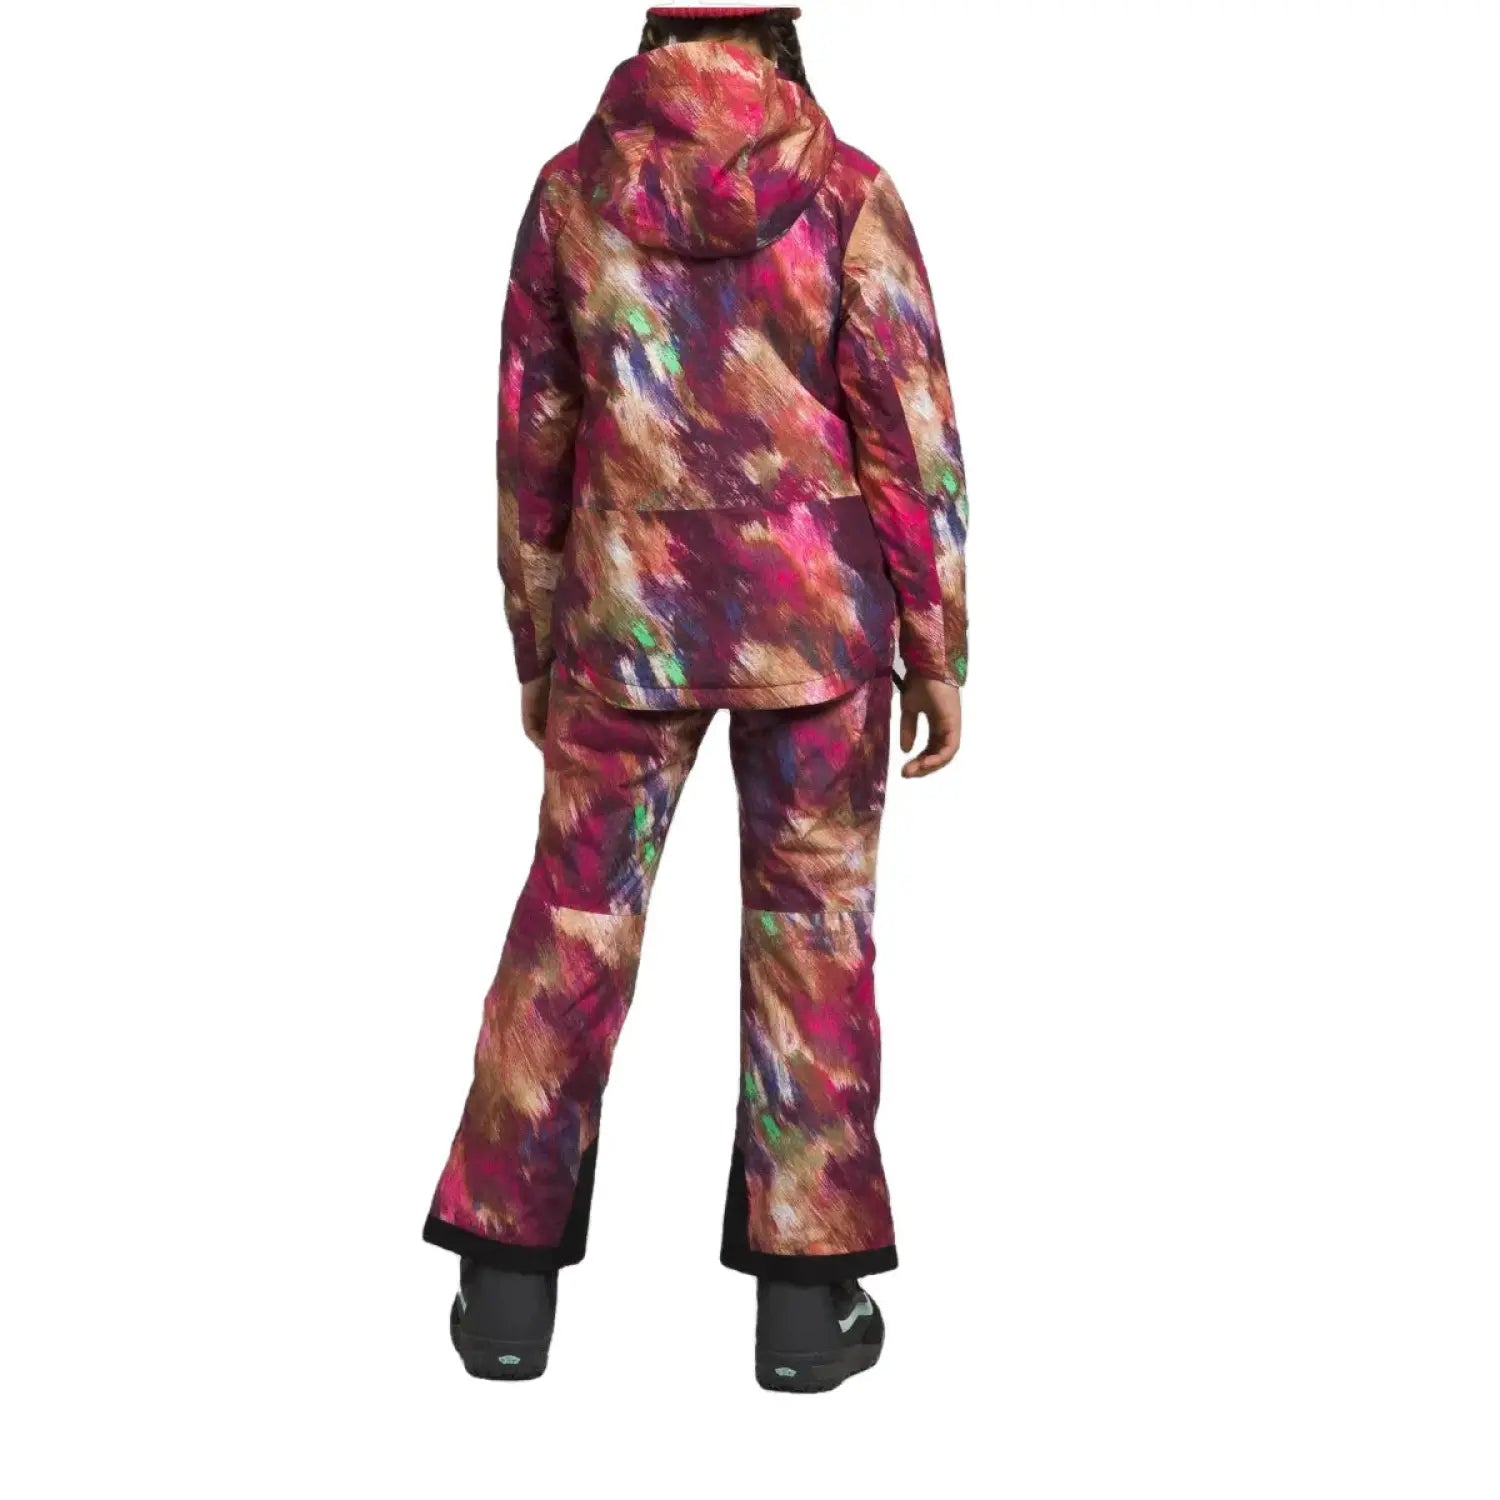 The North Face Girl's Freedom Insulated Jacket shown in Boysenberry Paint. Back view on model.